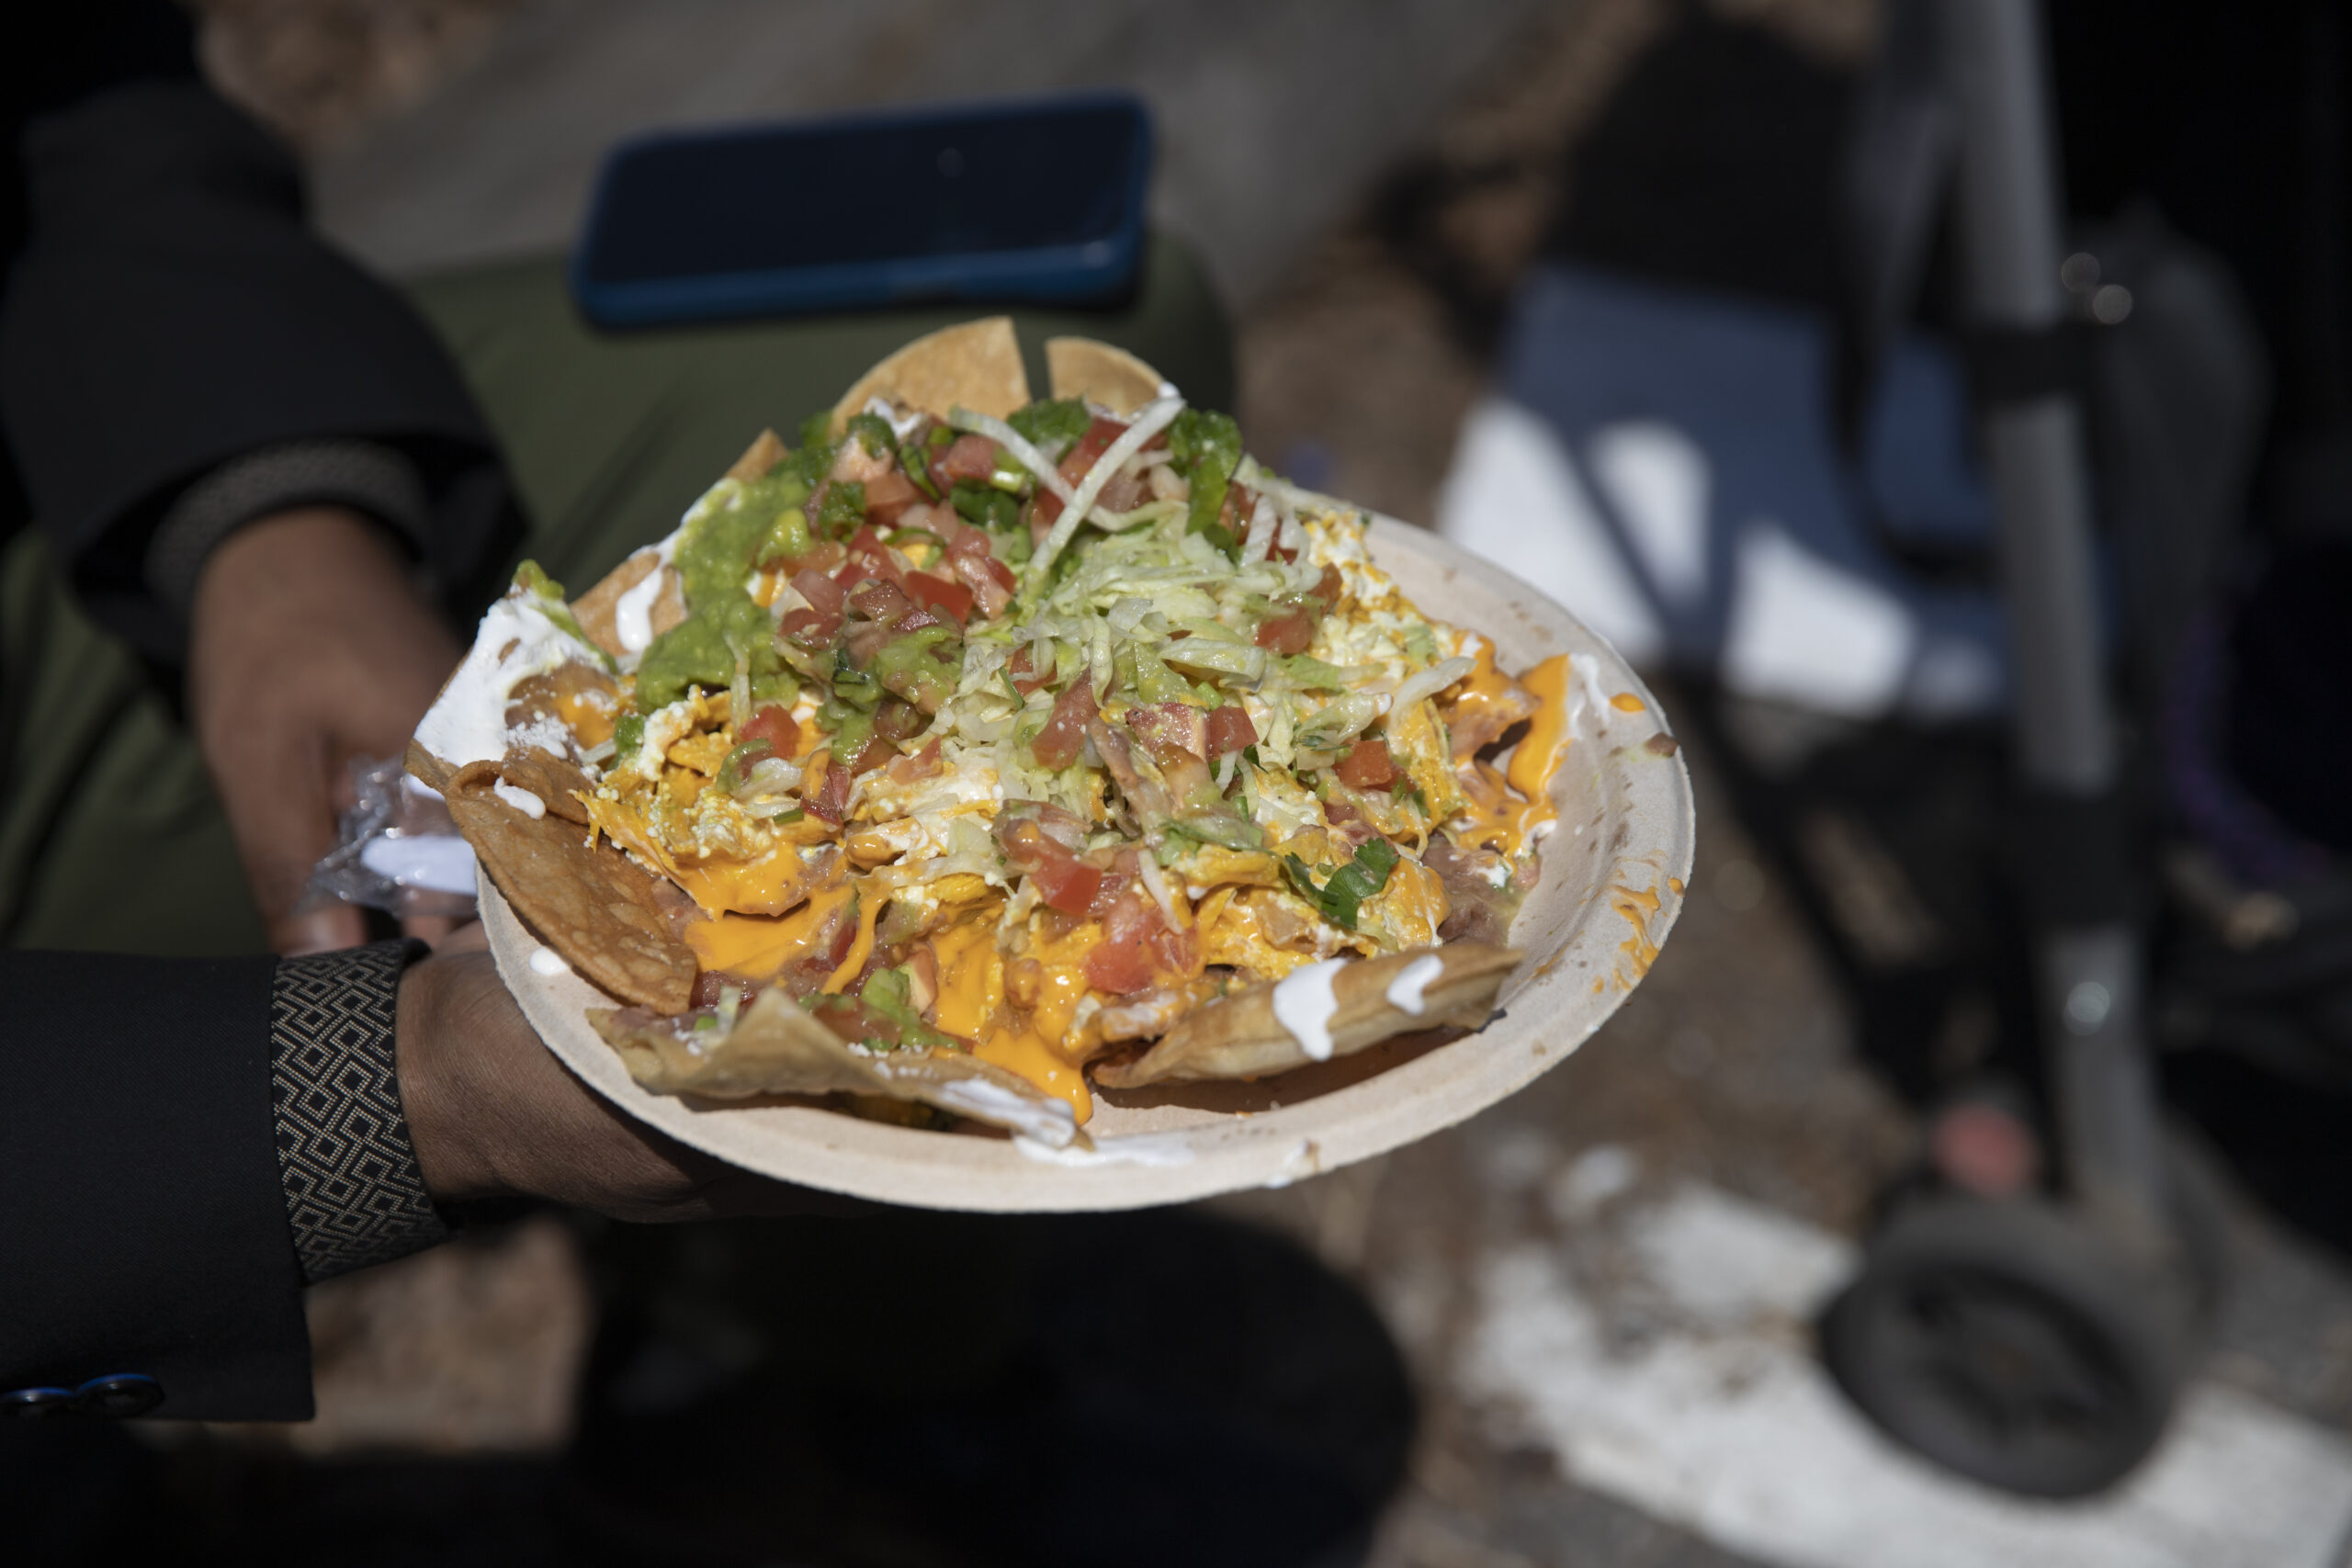 A plate of nachos from Lupita’s at Prospect Park Smorgasburg.